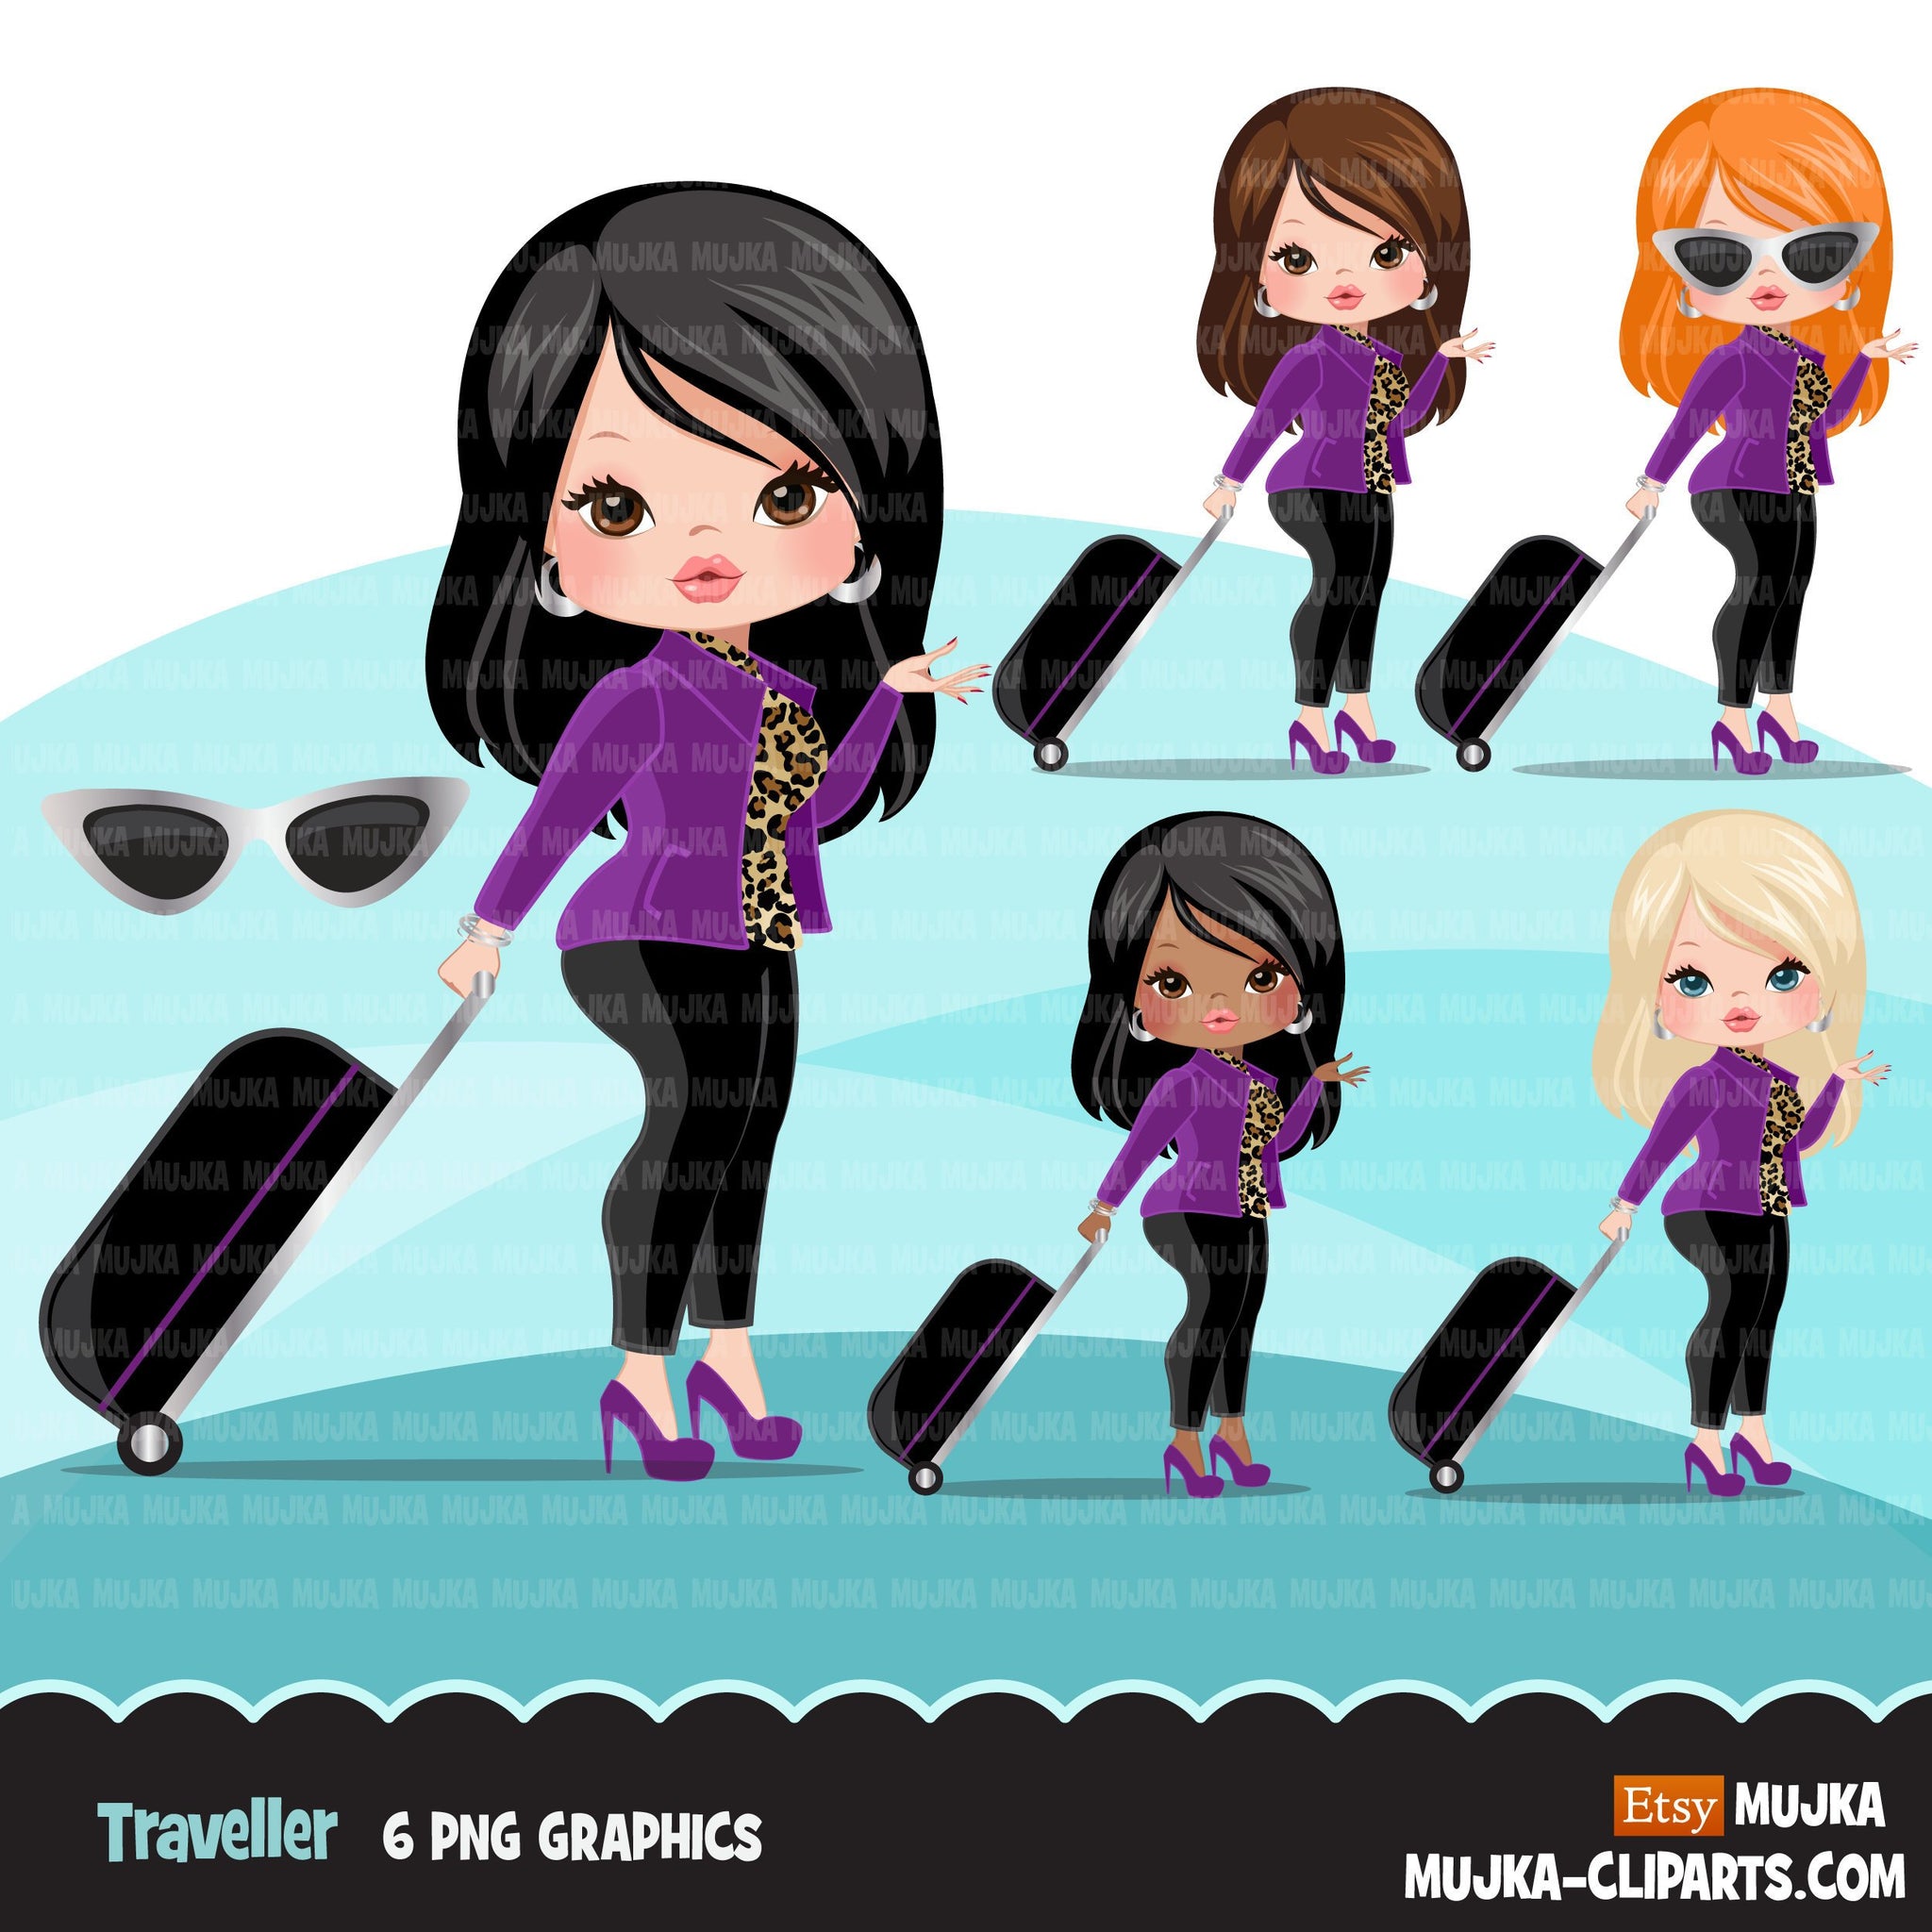 Travelling girl clipart avatar with suitcase, print and cut, shop logo boss girl clip art purple leopard skin graphics